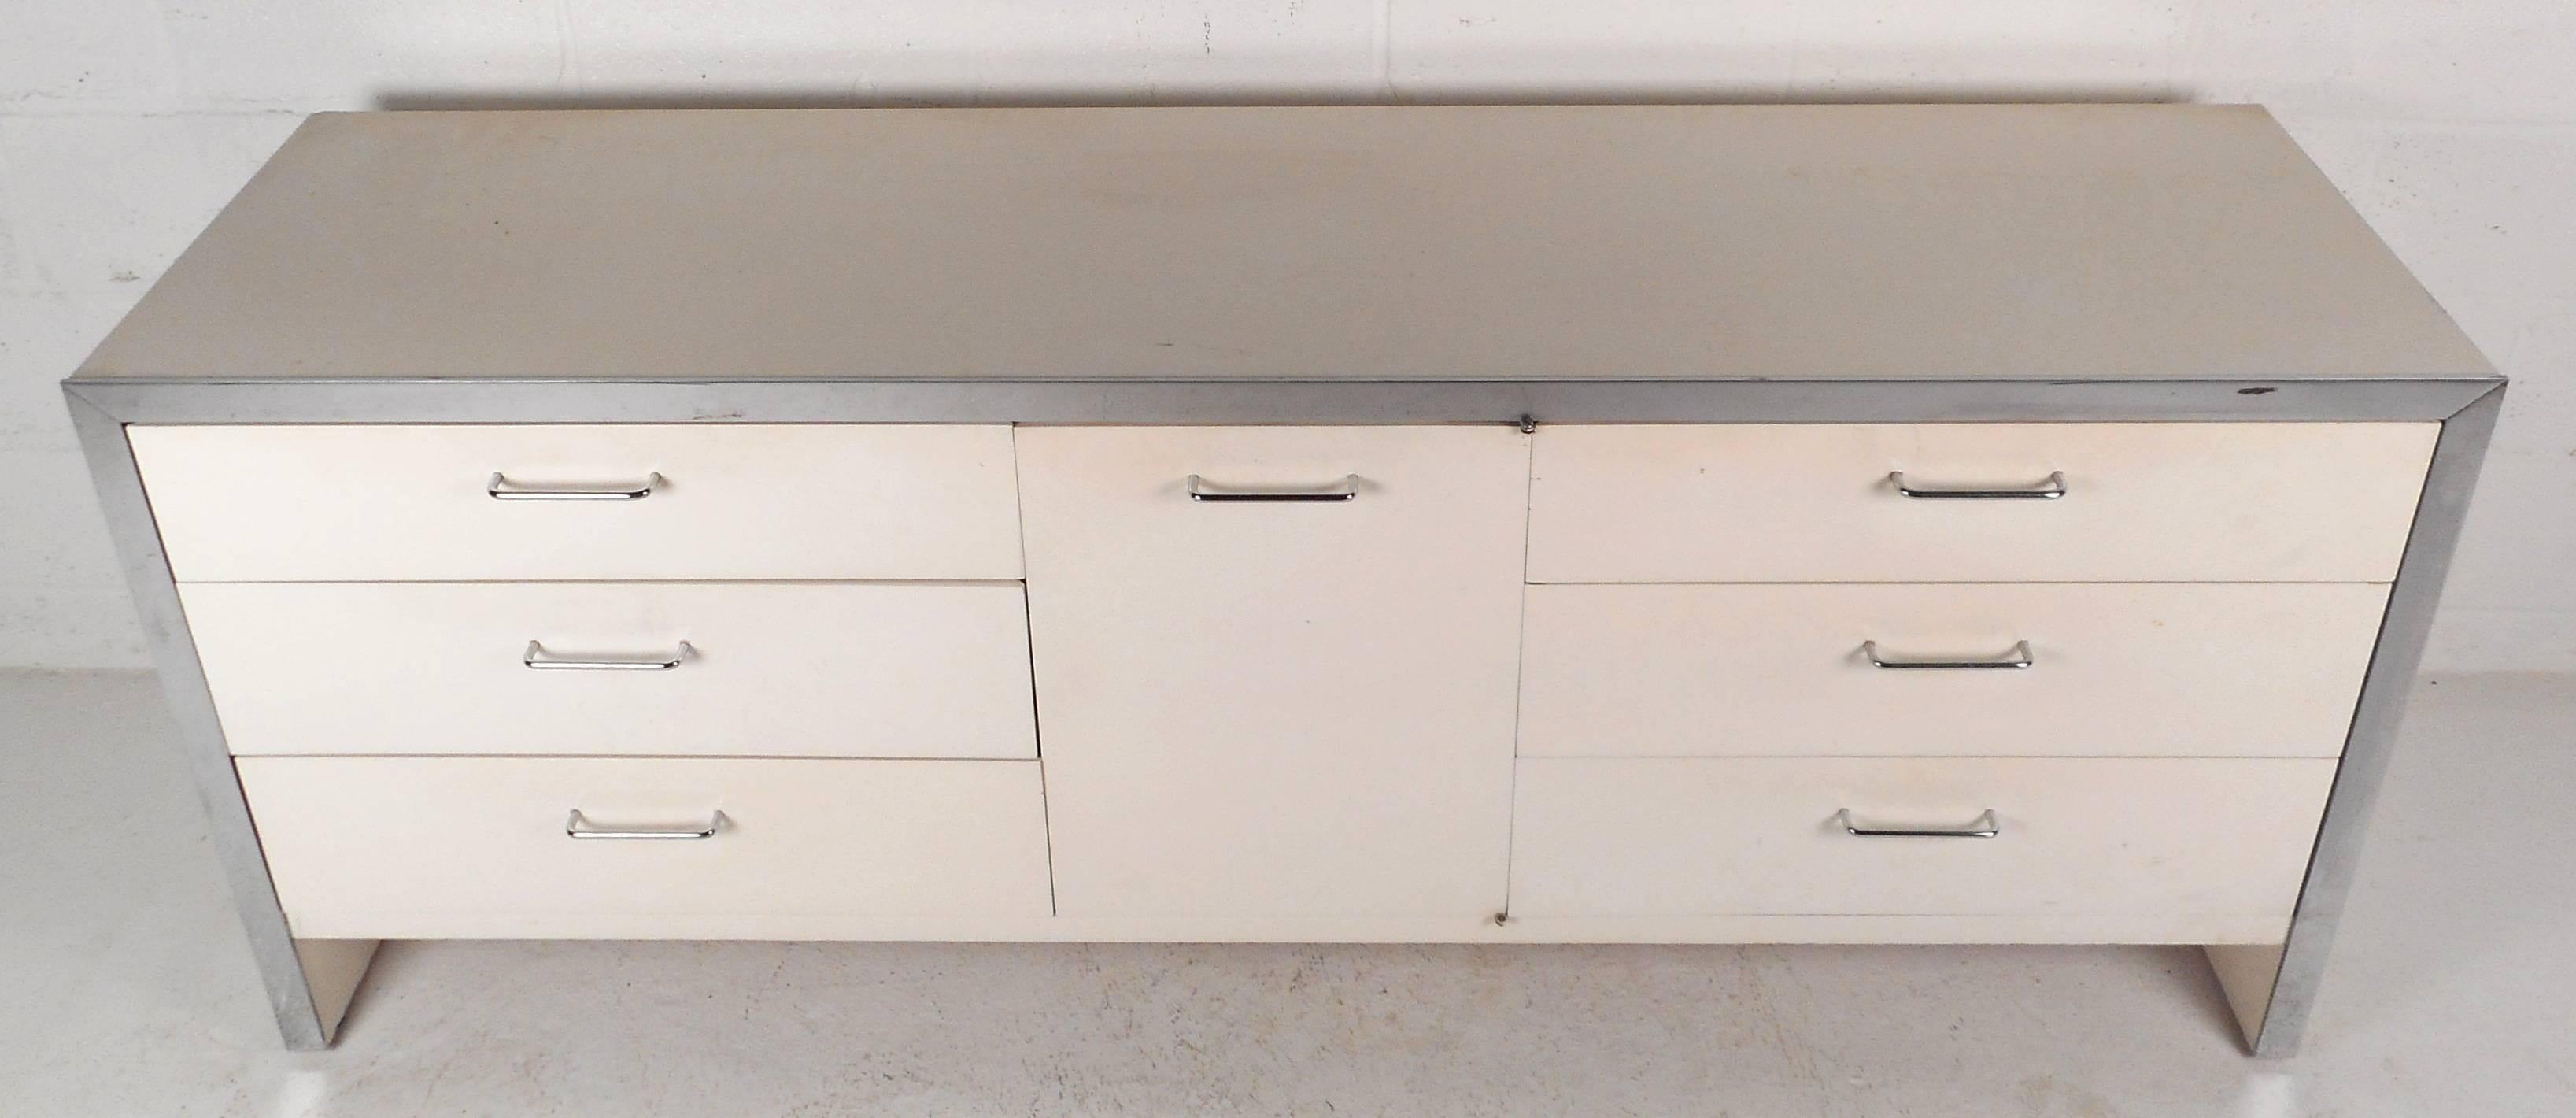 This beautiful vintage modern sideboard features ultra white Formica laminate and chrome trim. The sleek design offers plenty of room for storage within its six large drawers and three hidden small drawers. Unique chrome pulls and sturdy